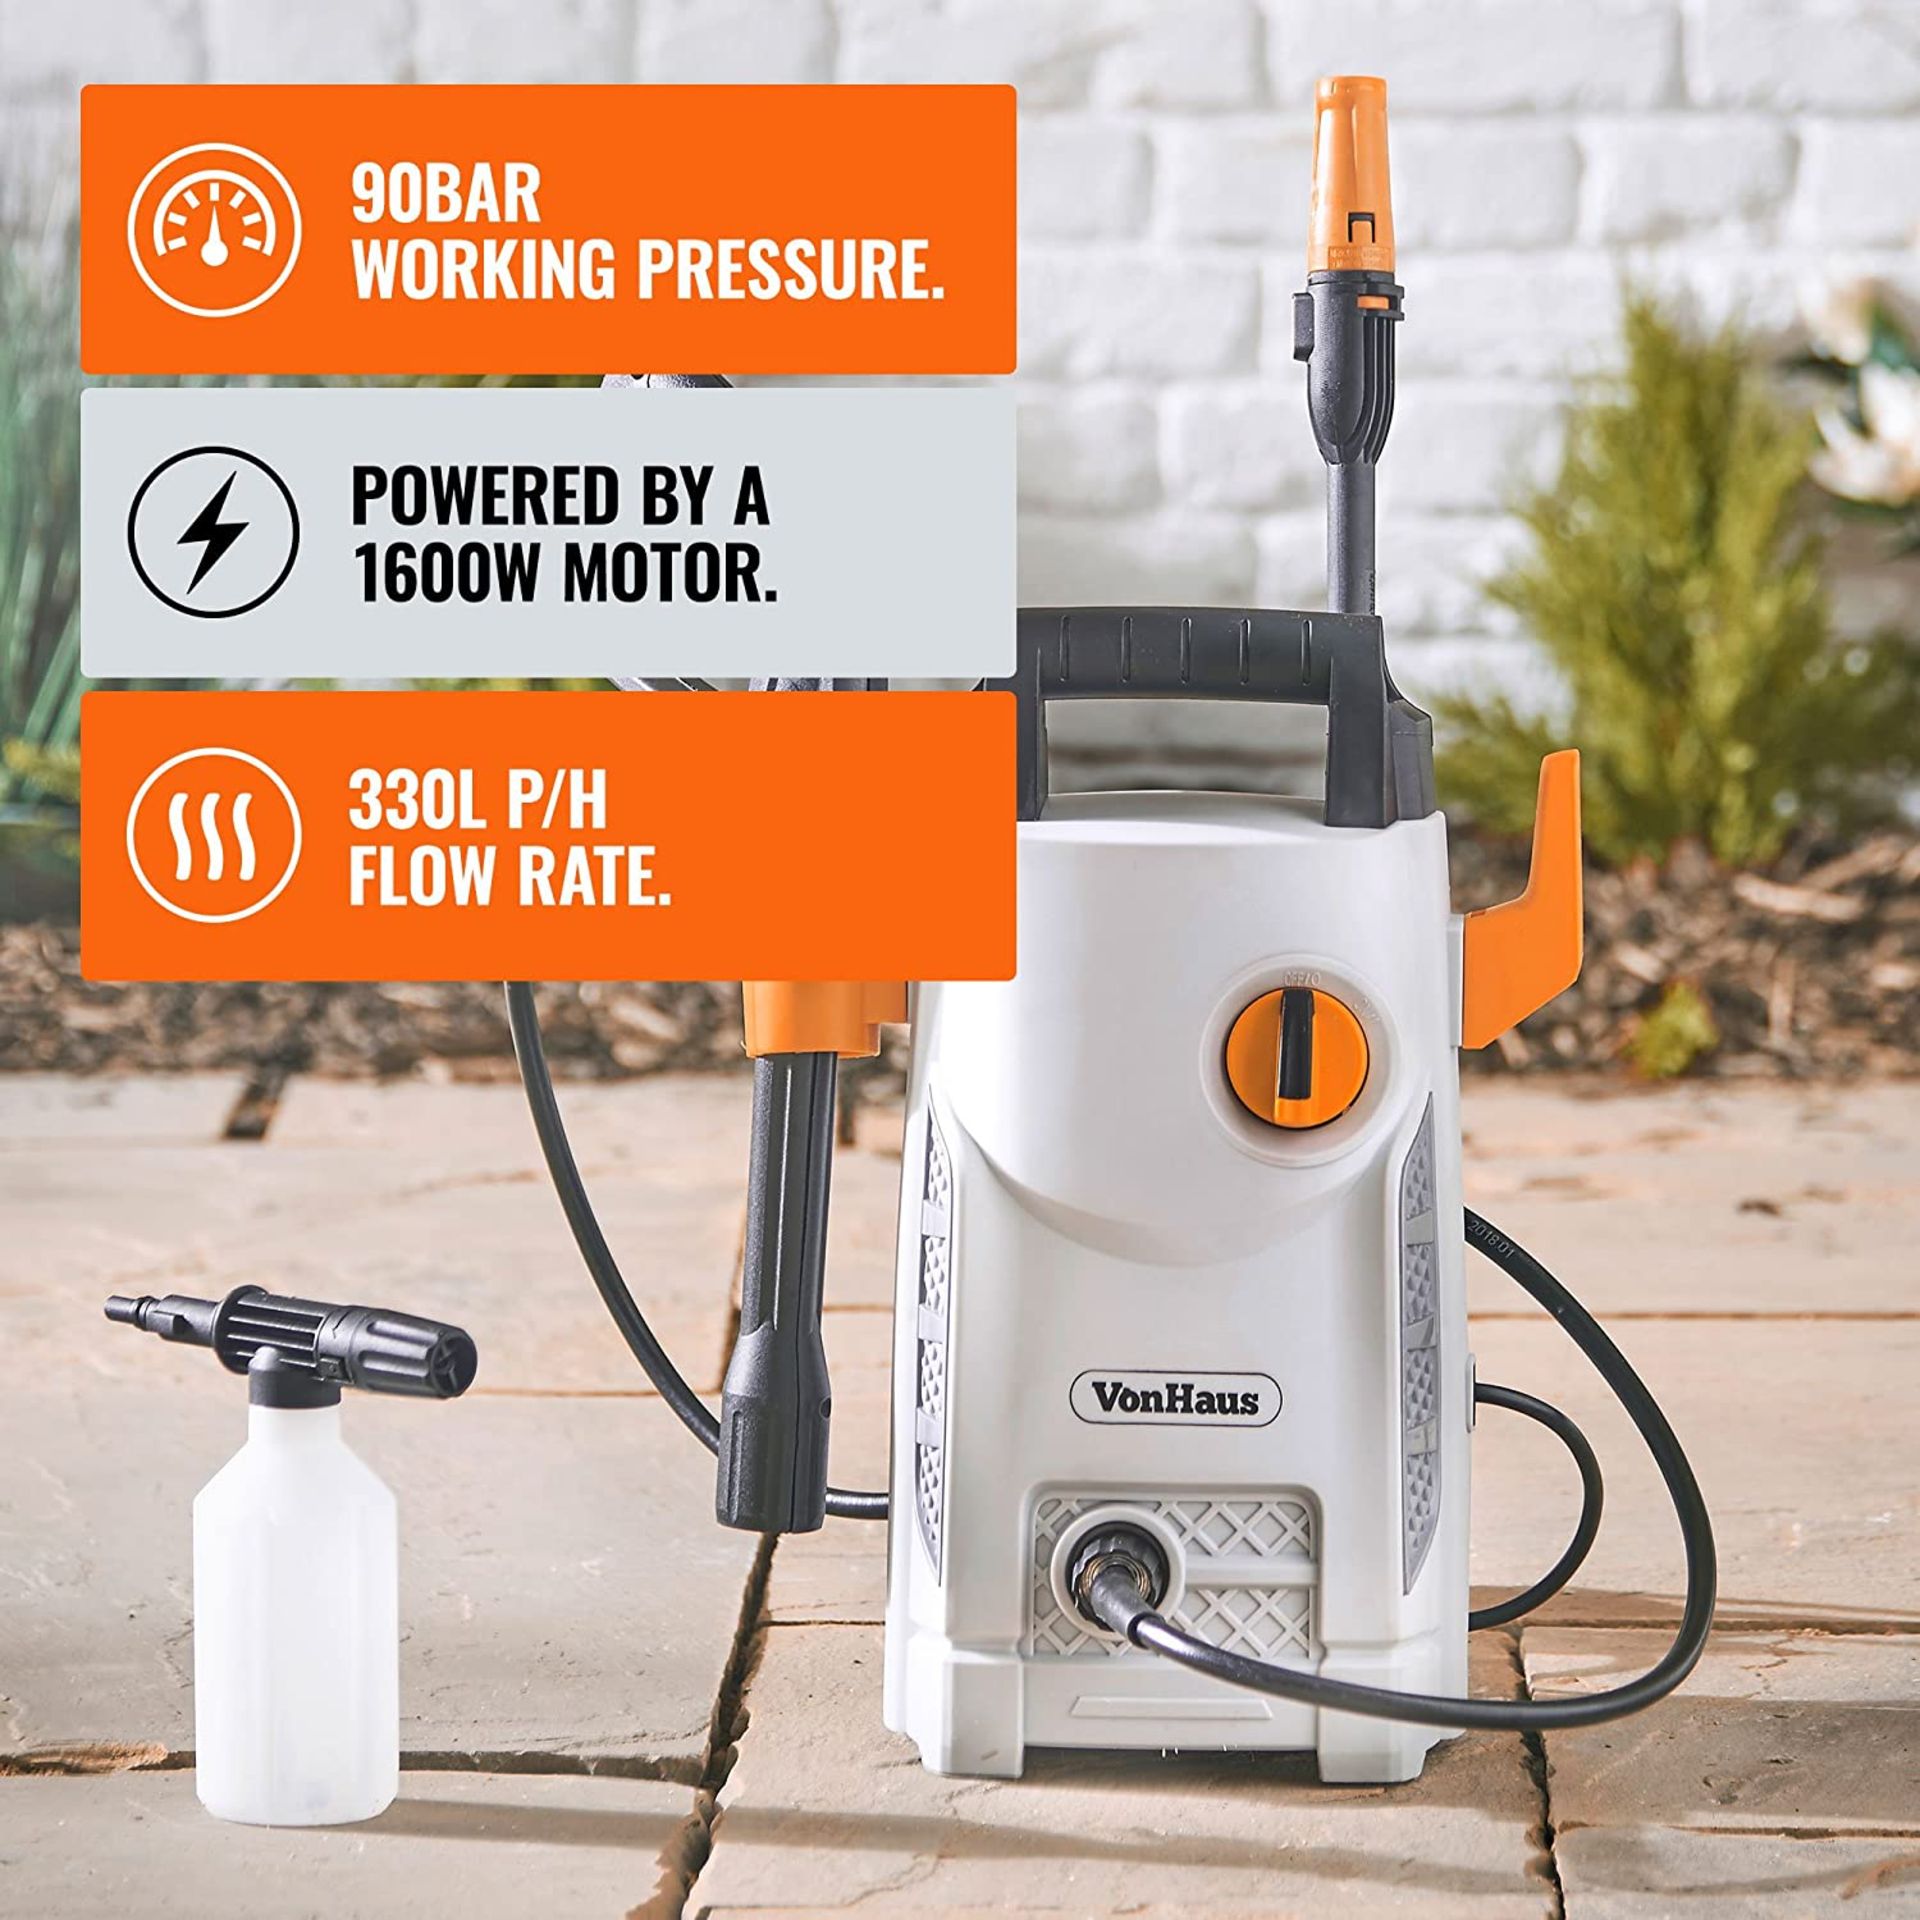 (GL80) 1600W Pressure Washer with Accessories – Outdoor Home/Patio & Car Cleaner - 90bar work...